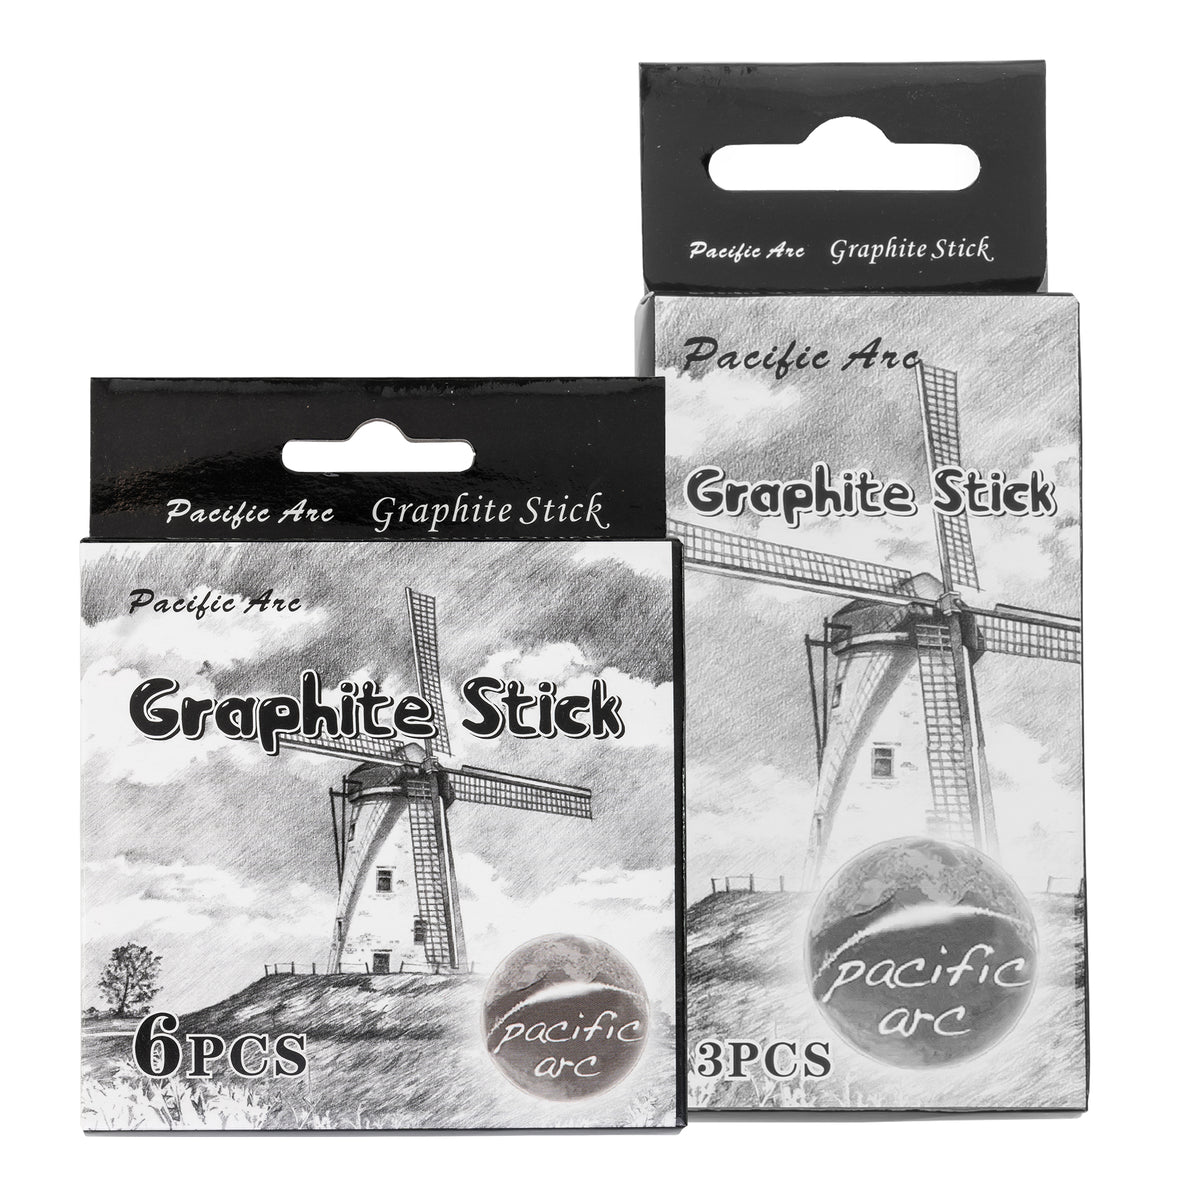 Pacific Arc Artist Vine Charcoal, Soft, Black 4 Charcoal Sticks for Drawing, Sketching, and Fine Art